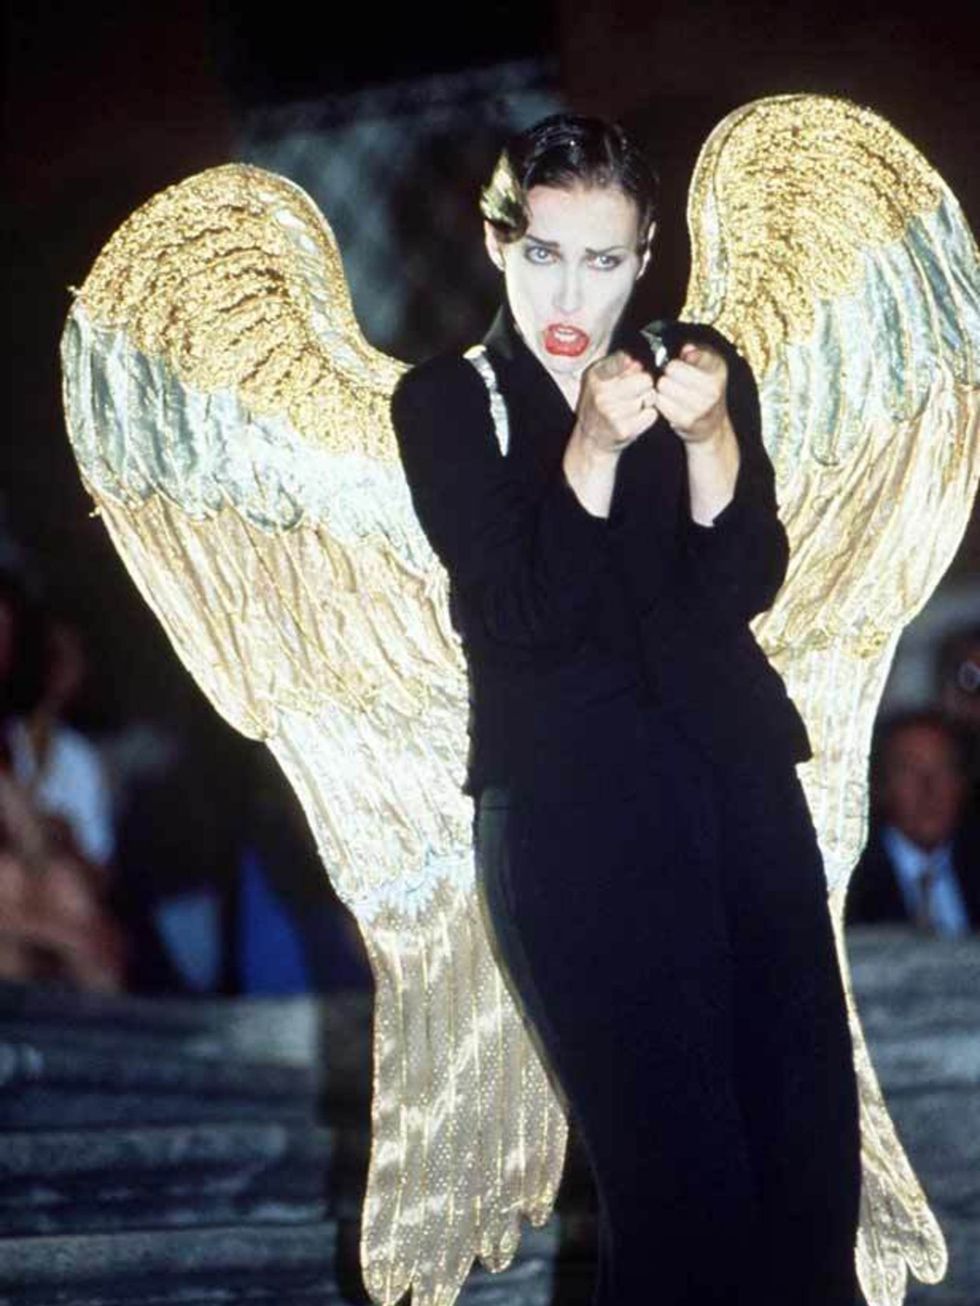 <p><a href="http://www.elleuk.com/content/search?SearchText=Annie+Lennox&amp;SearchButton=Search">Annie Lennox</a> rocks a trouser suit with wings performing with The Eurythmics in Rome, in 1992</p>